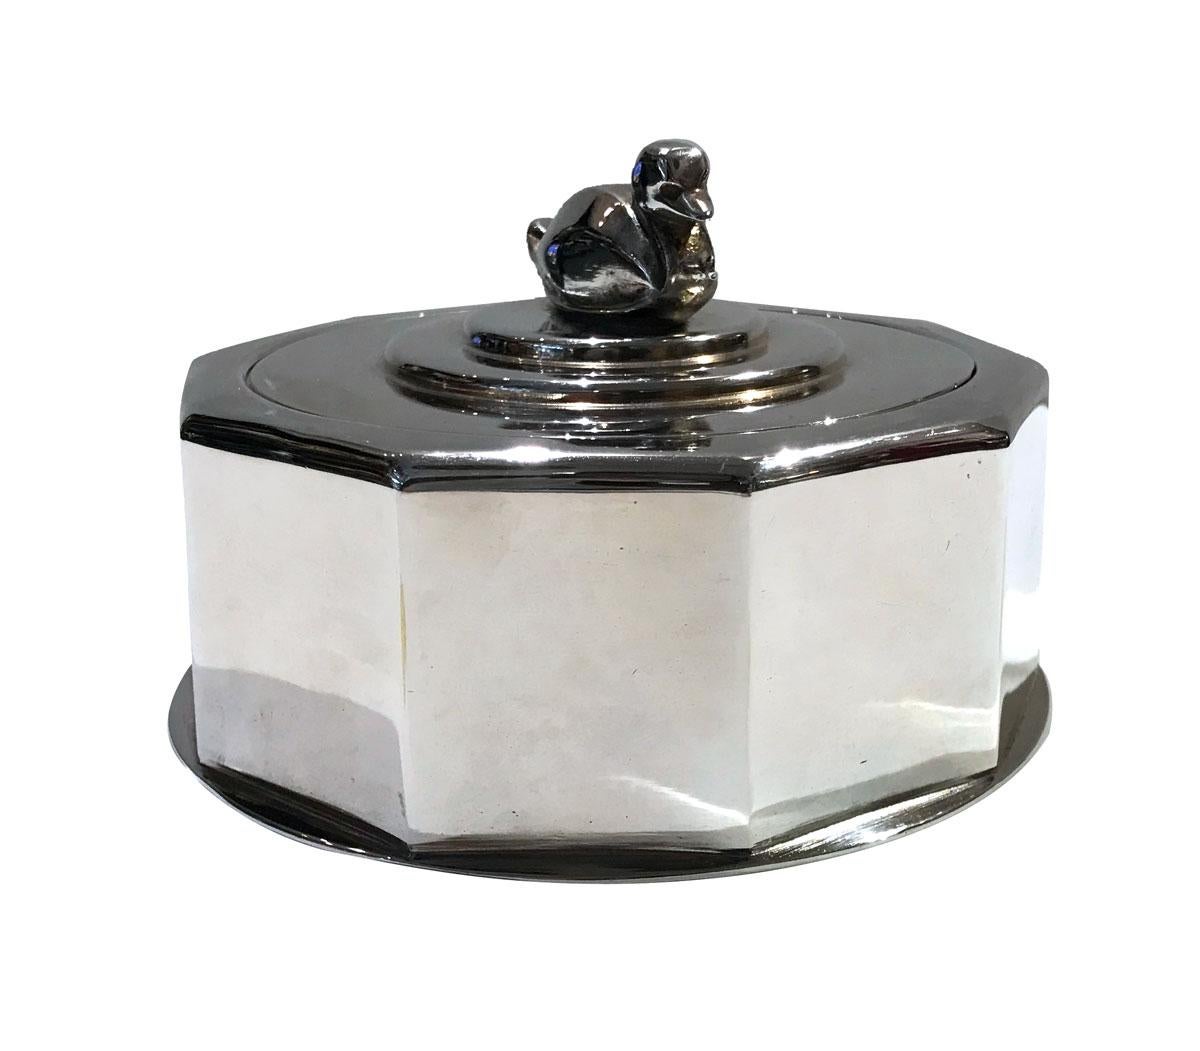 Art Deco silverplated decagonal box on a circular base. The lid is decorated with two round moldings and a stylized duck knob. 
Very beautiful item and rare. Stamped beneath the name of the metal worker 